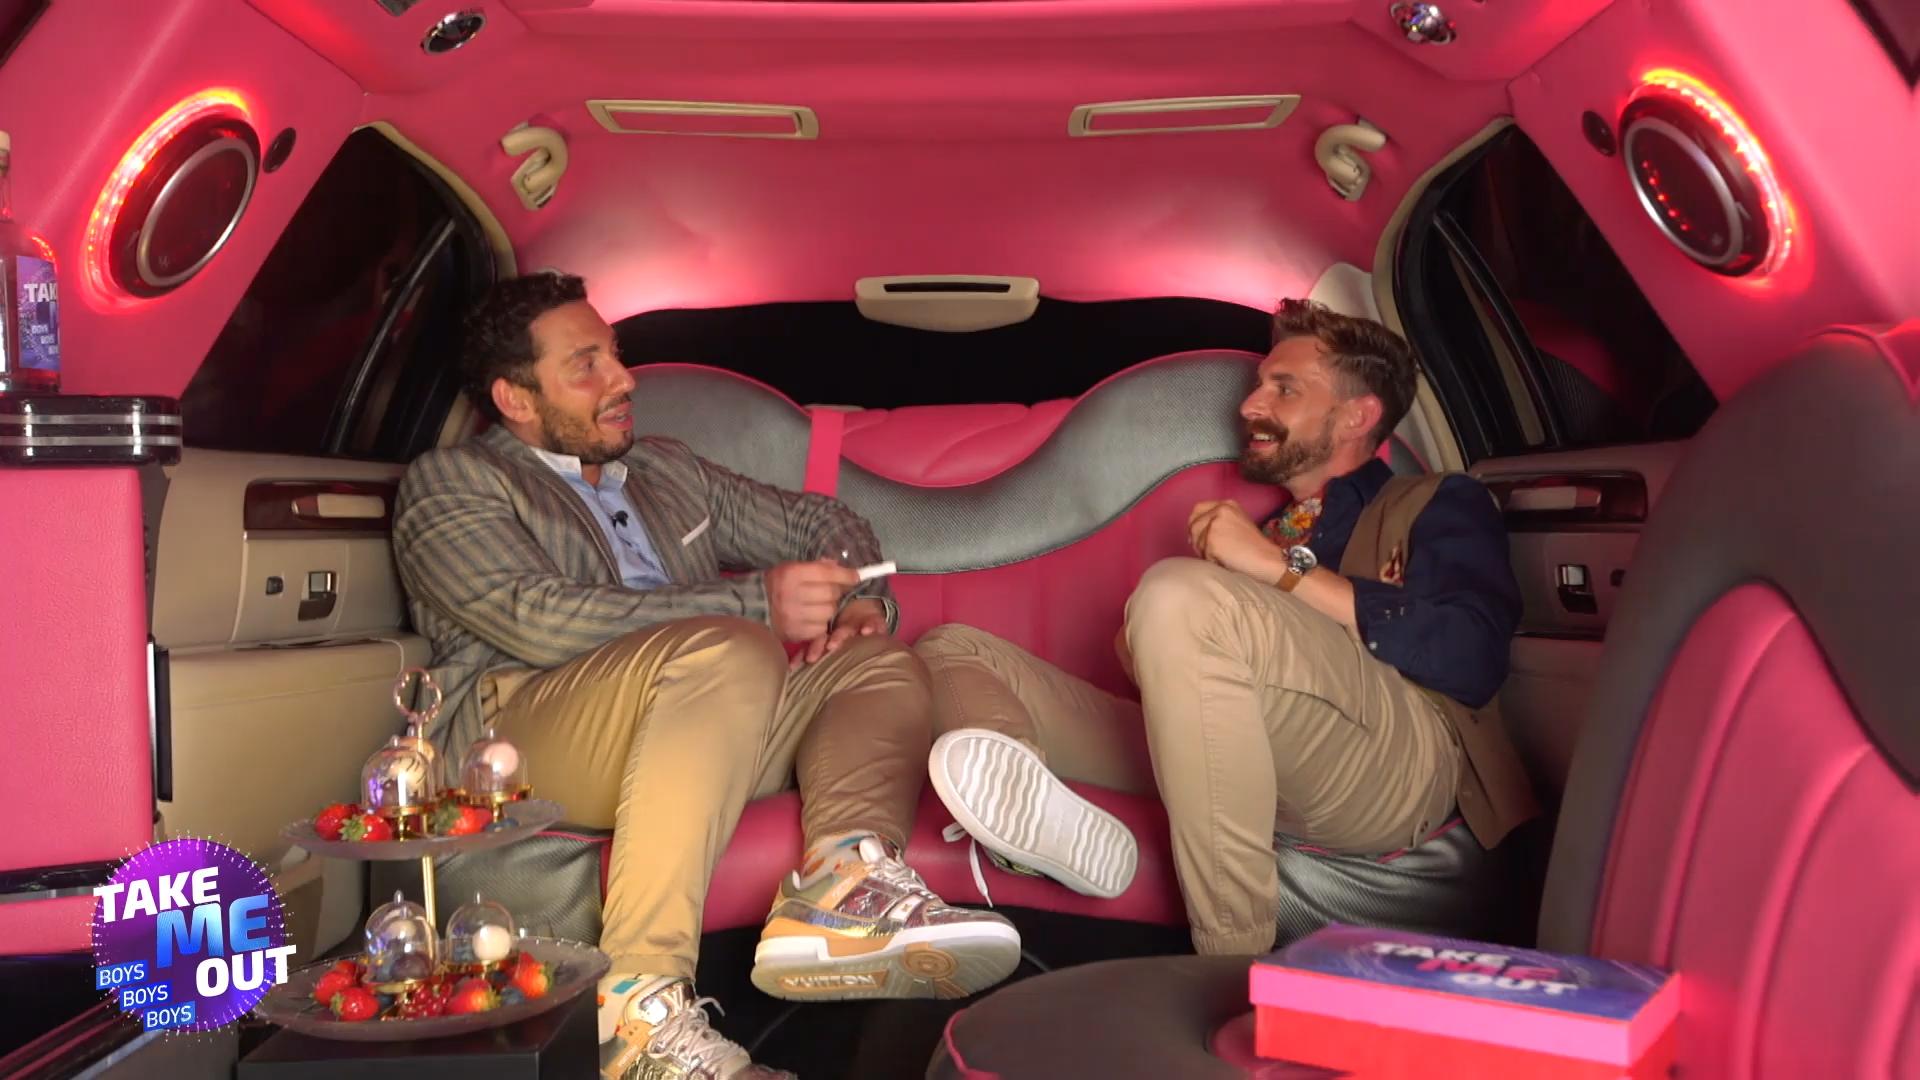 Michael und Niklas kommen sich auf andere Art "sehr nahe" Exklusives "Take Me Out"-Limo-Date